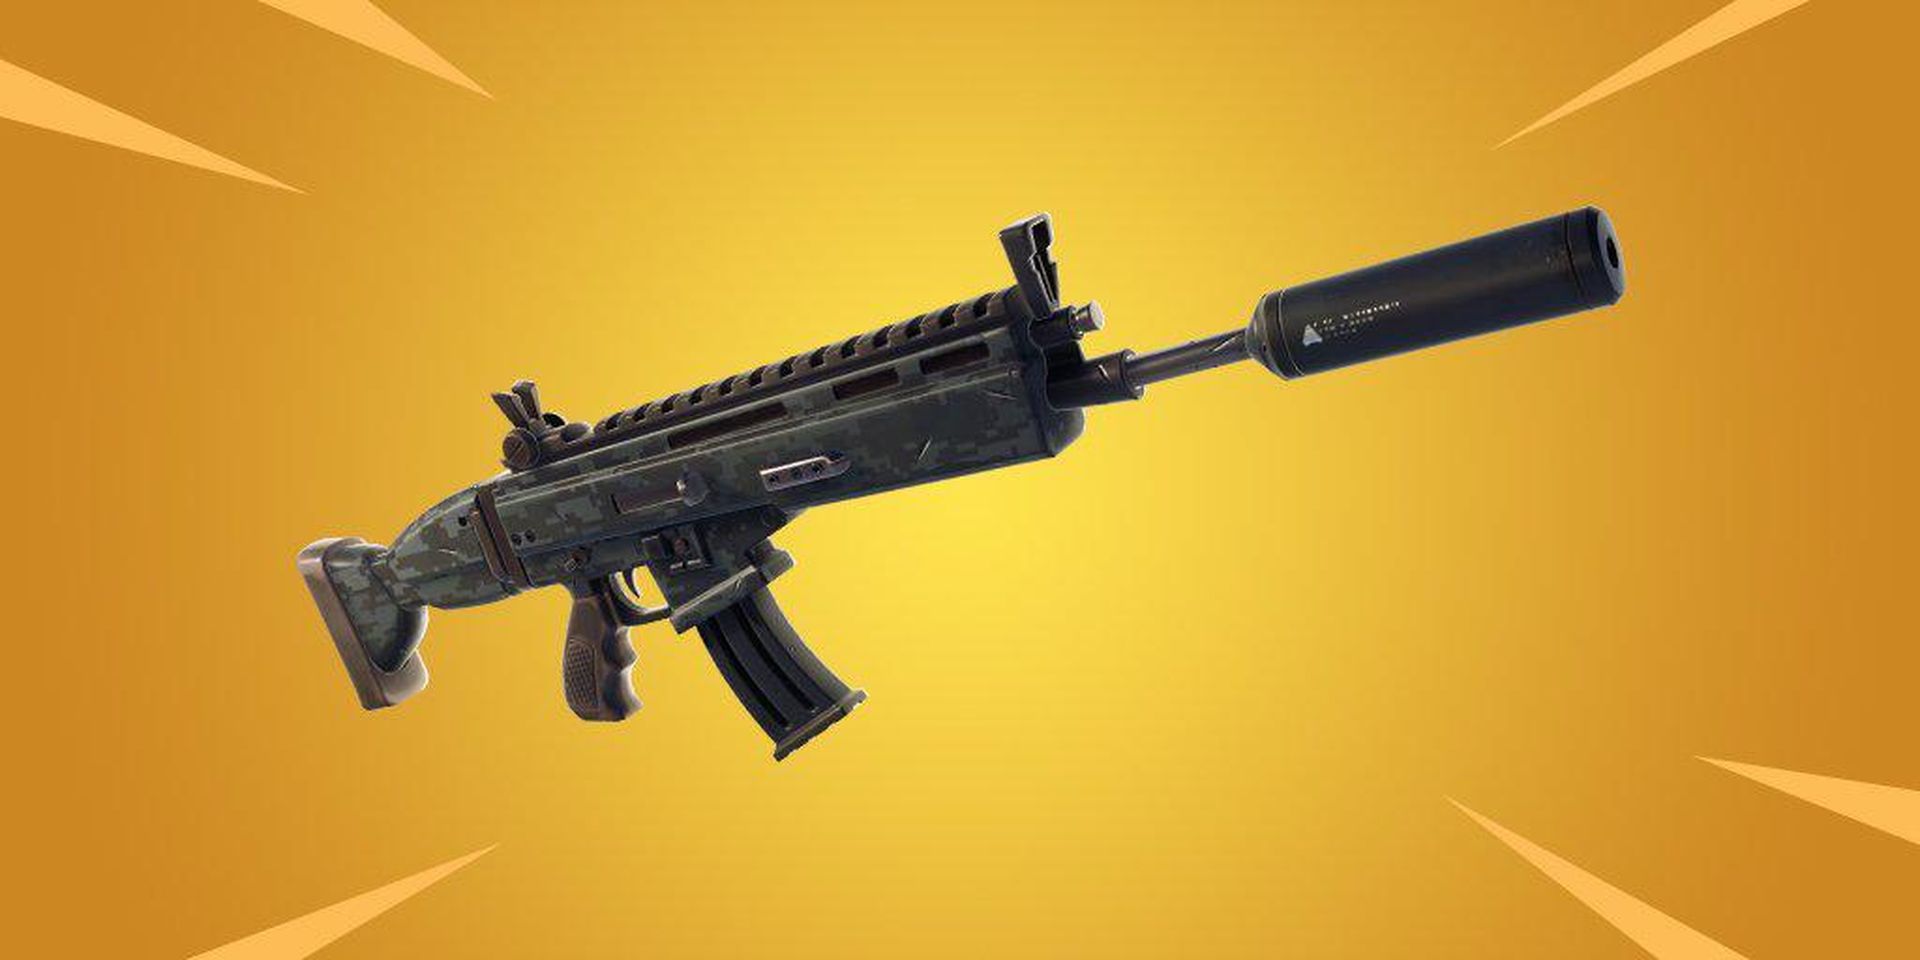 In this article, we will be covering Fortnite Shadow of Phantasm quests: Shadow Bomb, Shield Bubble, Suppressed SMG, and Suppressed Assault Rifle location.